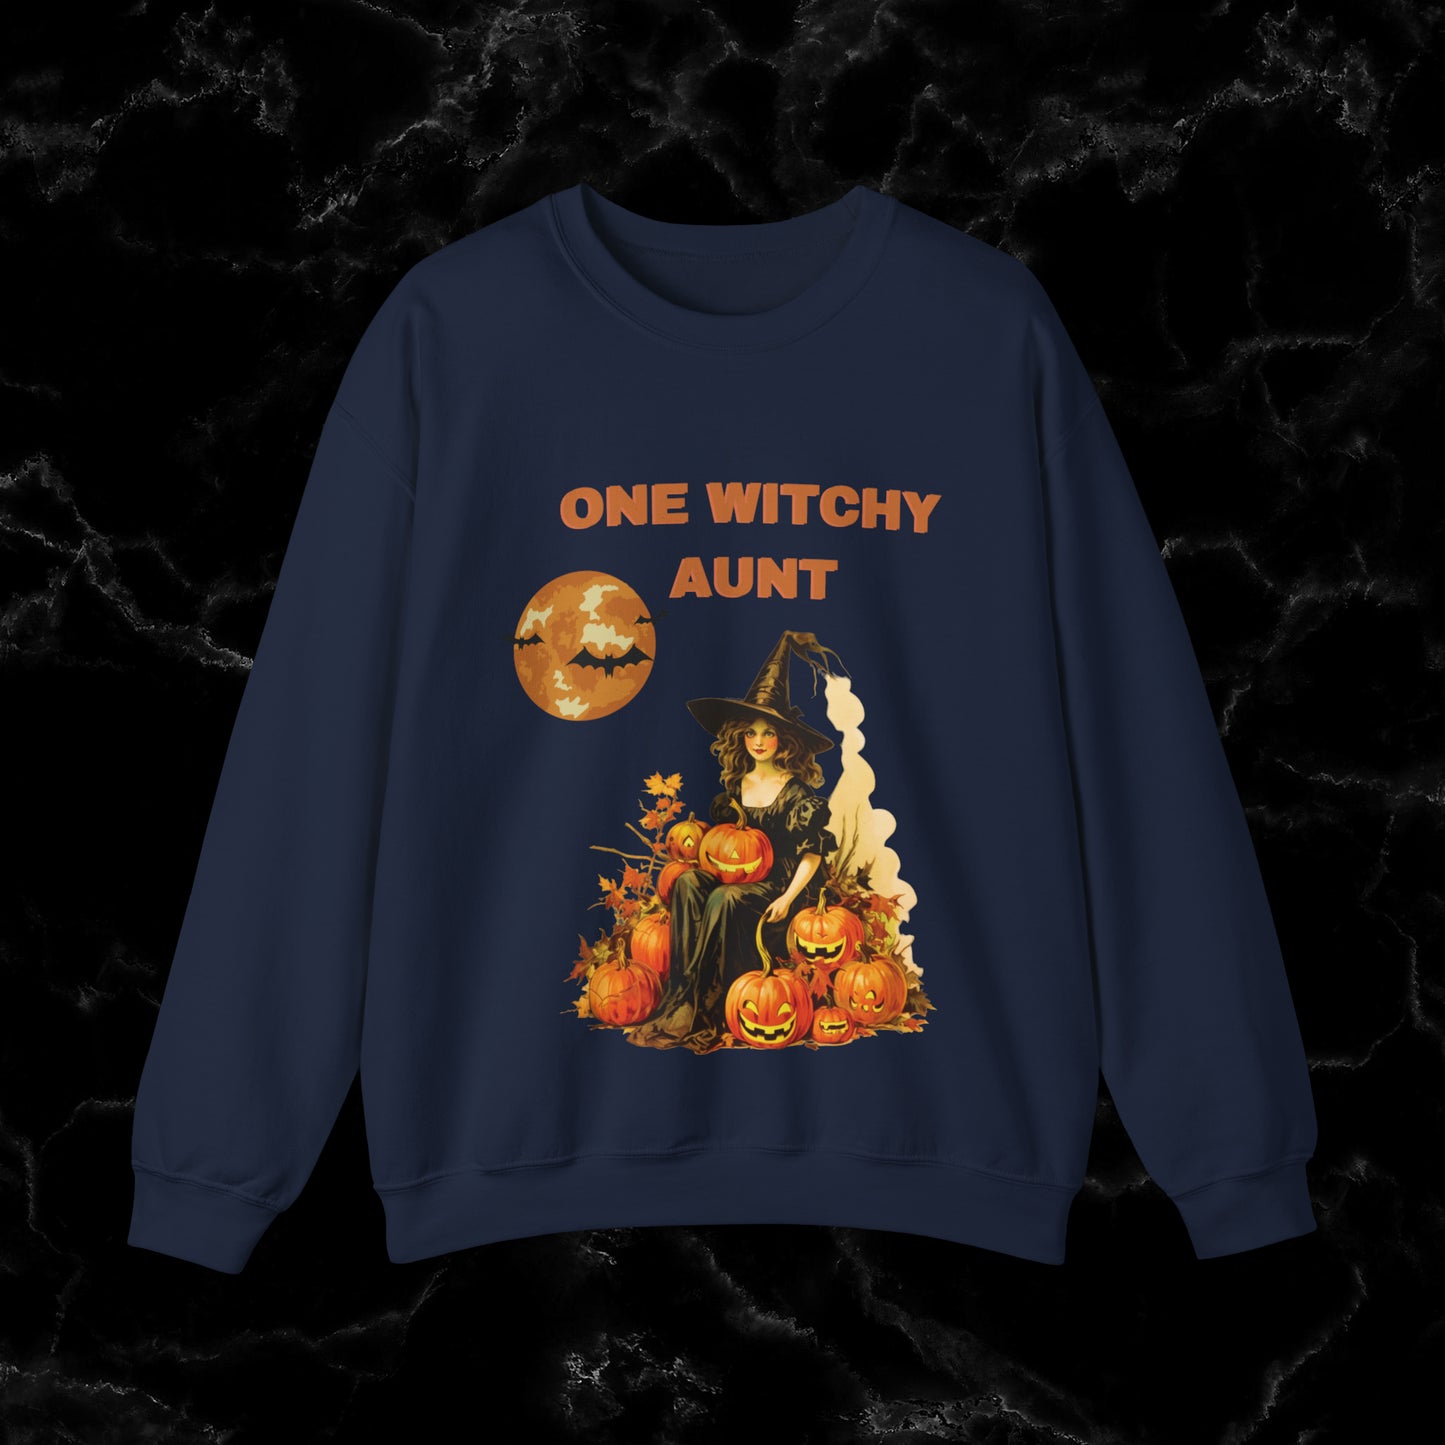 One Witchy Aunt Sweatshirt - Cool Aunt Shirt, Feral Aunt Sweatshirt, Perfect Gifts for Aunts Halloween Sweatshirt S Navy 